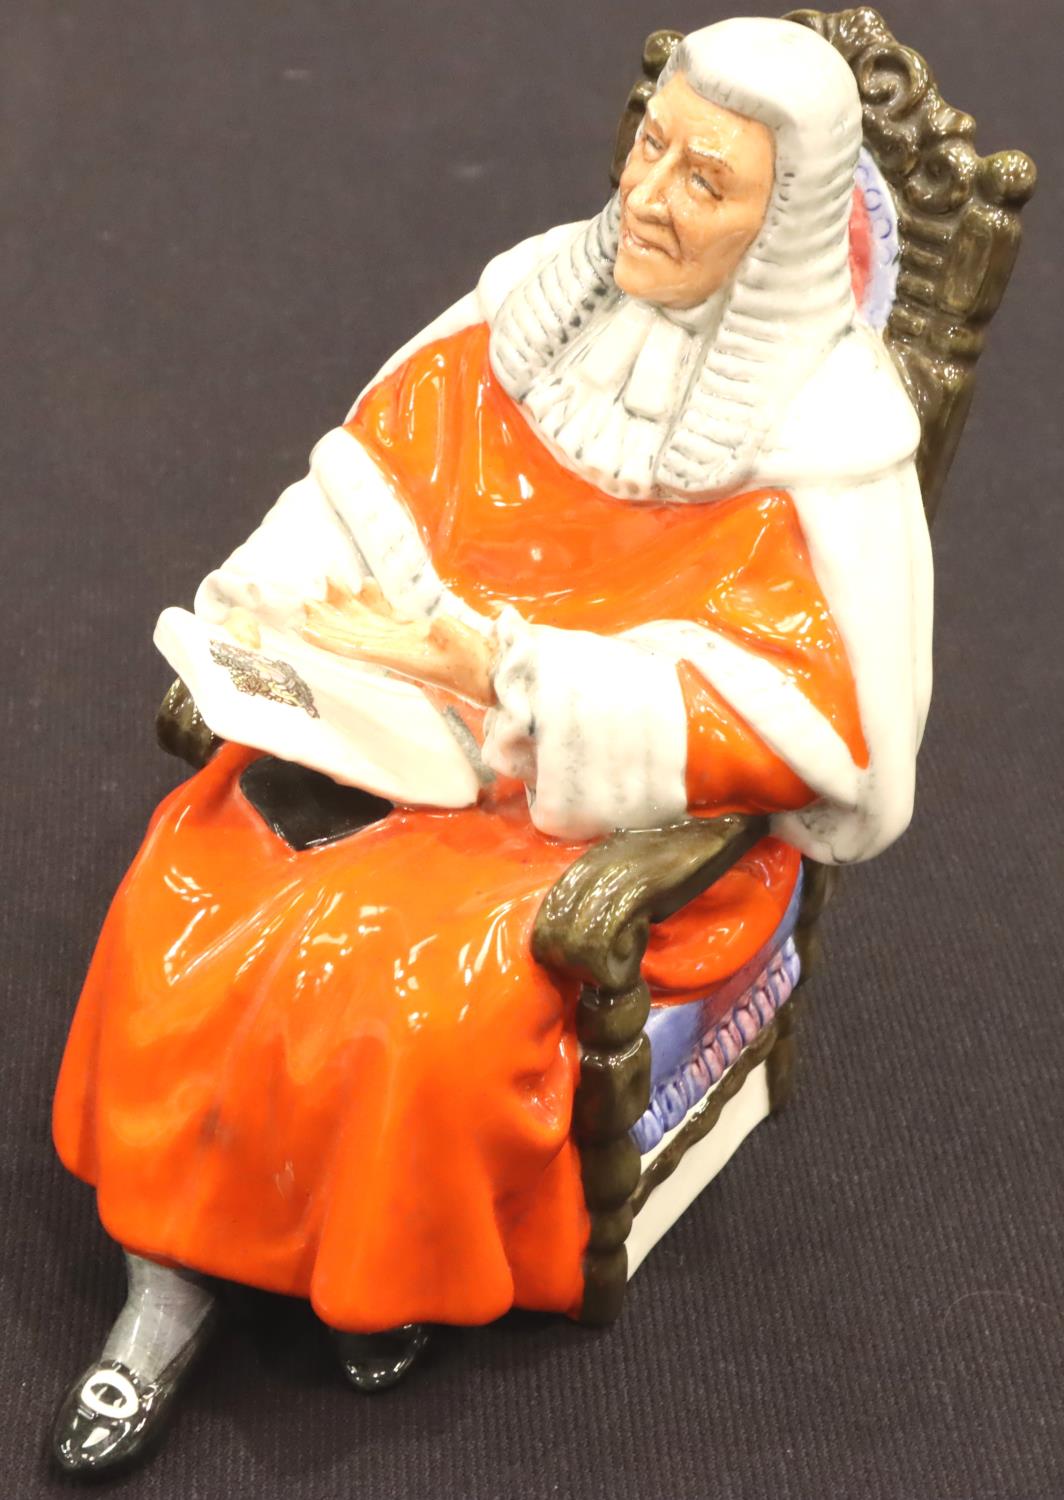 Royal Doulton figurine The Judge HN 2443, lacking thumb. P&P Group 2 (£18+VAT for the first lot